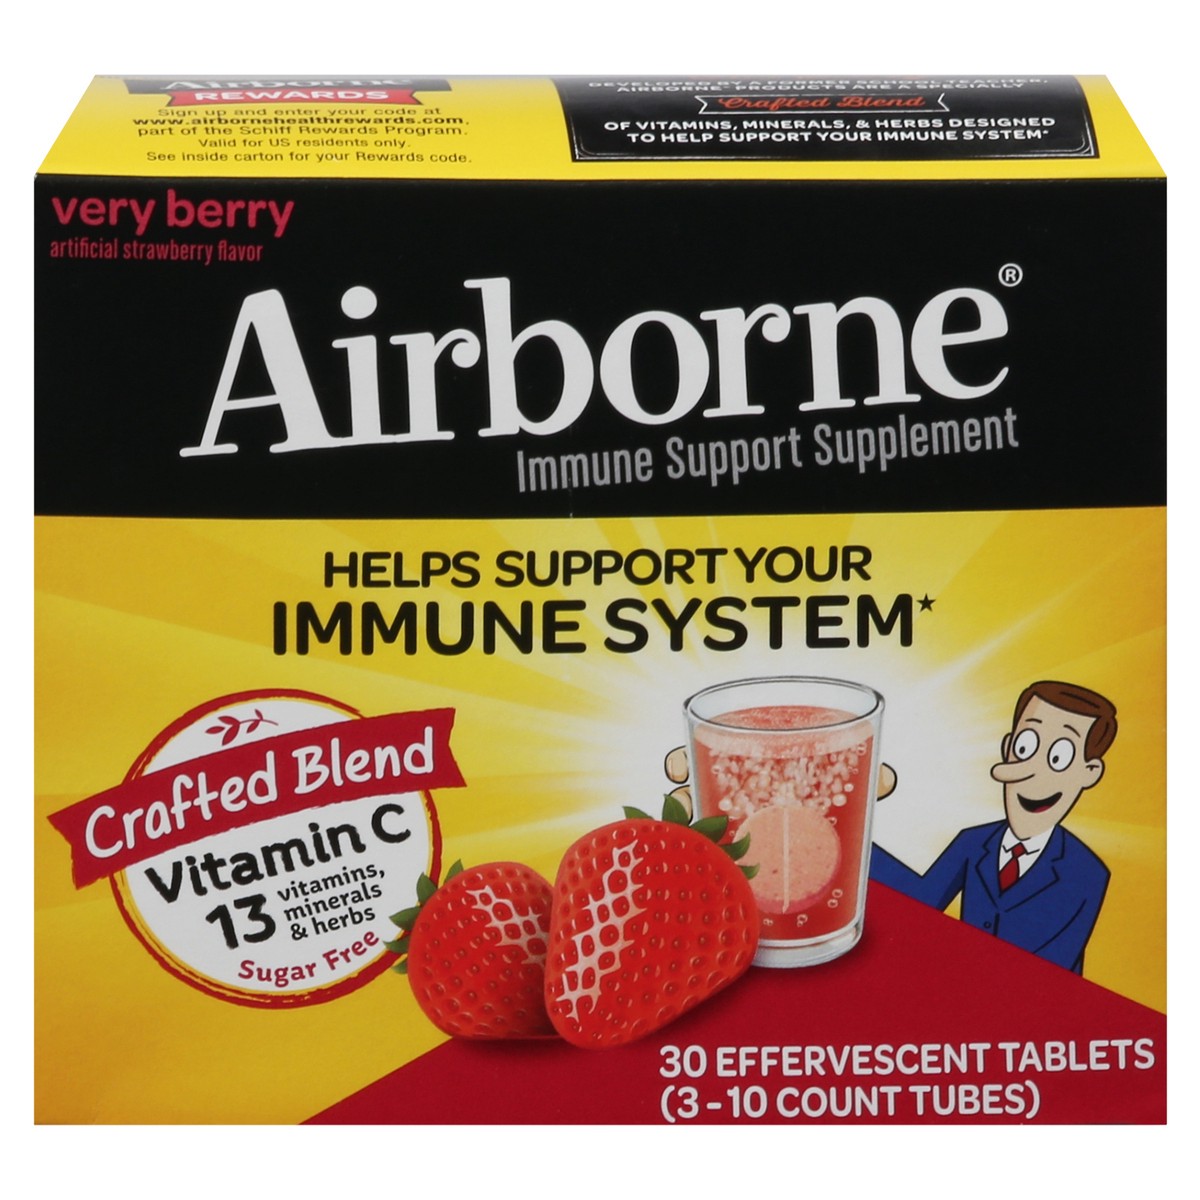 slide 1 of 14, Airborne Very Berry Effervescent Tablets, 30 count - 1000mg of Vitamin C, Immune Support Supplement, 30 ct